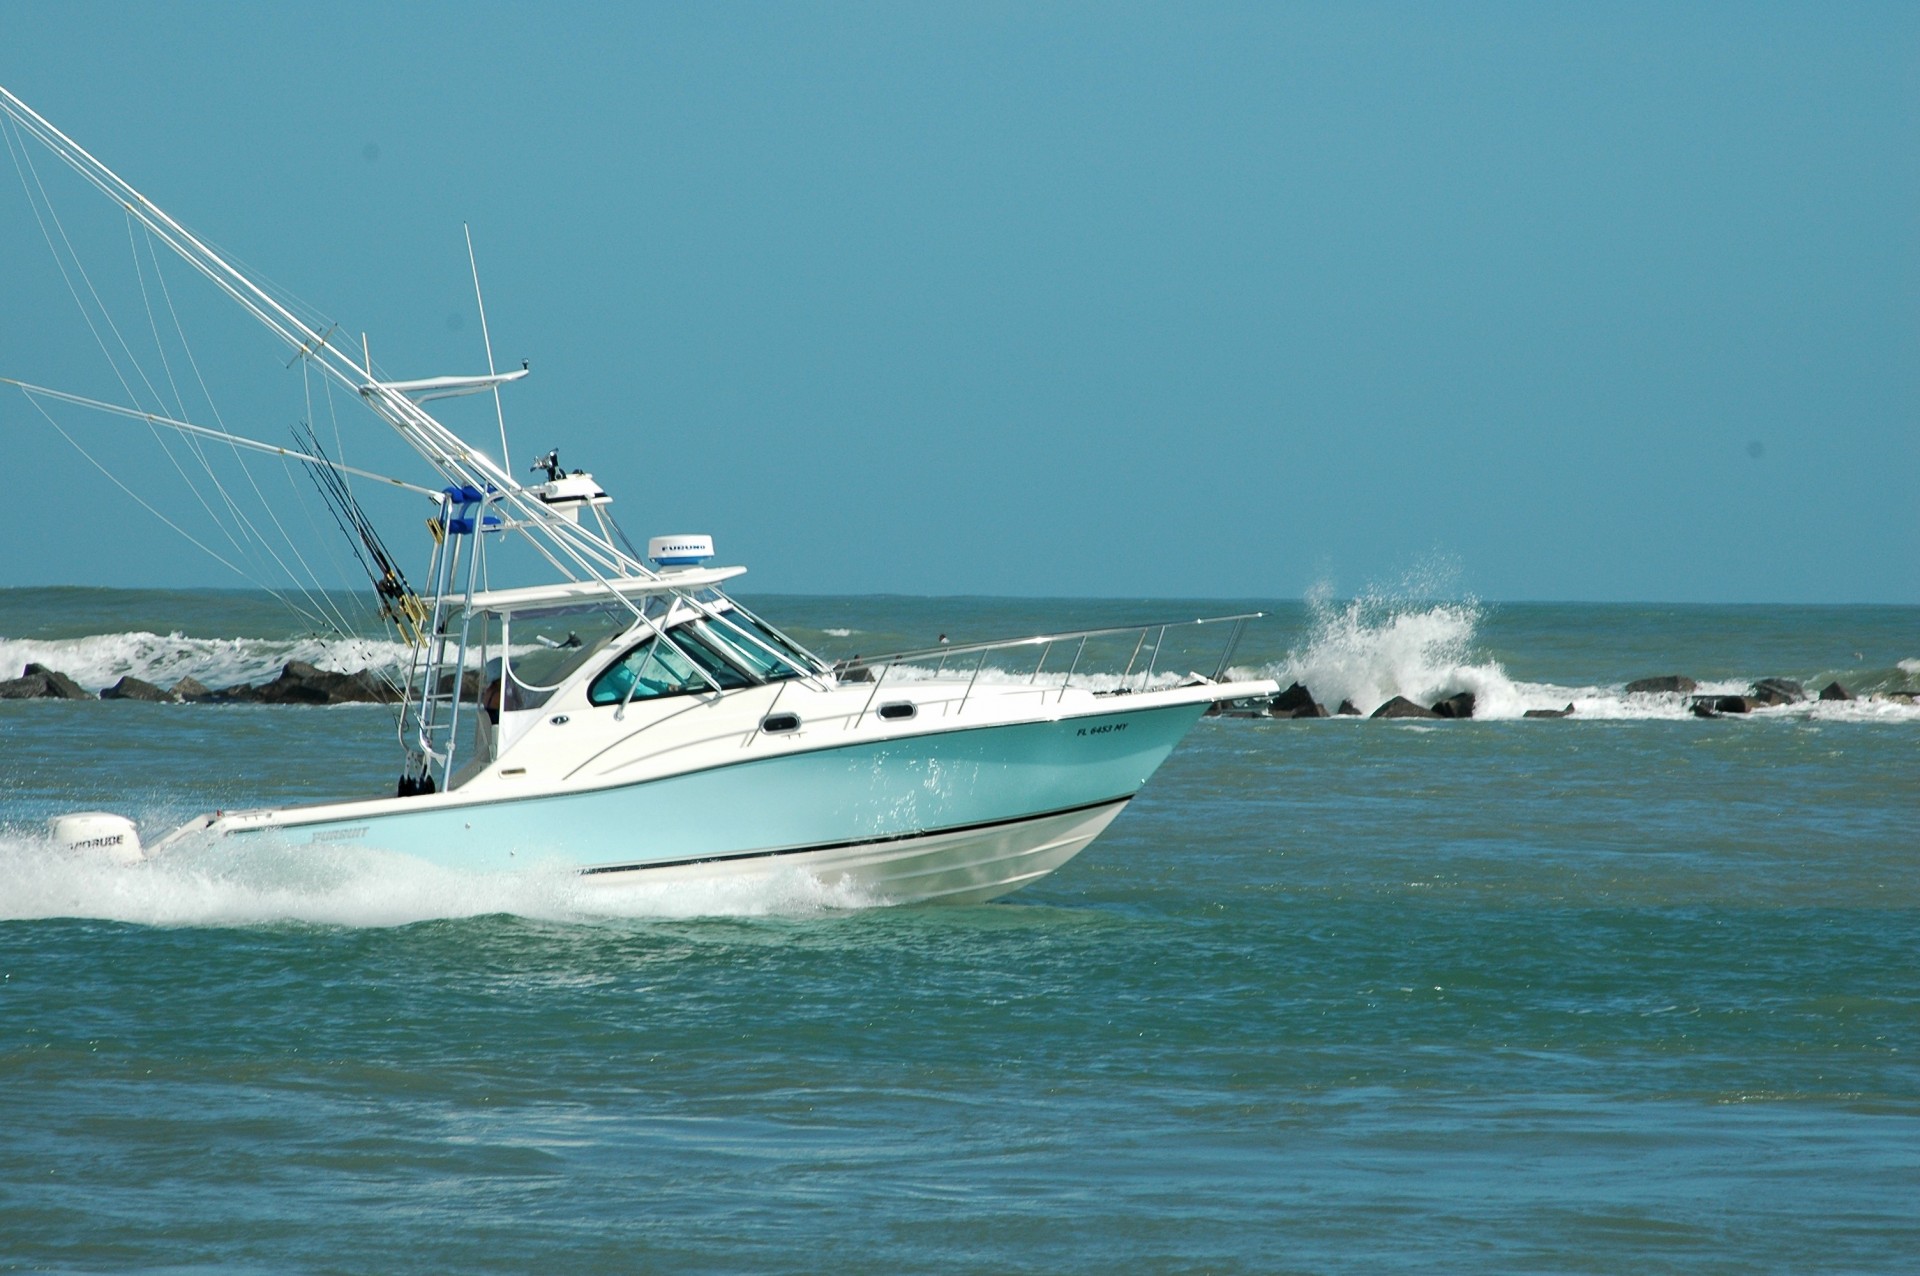 Sport fishing boat heading for the fishing grounds